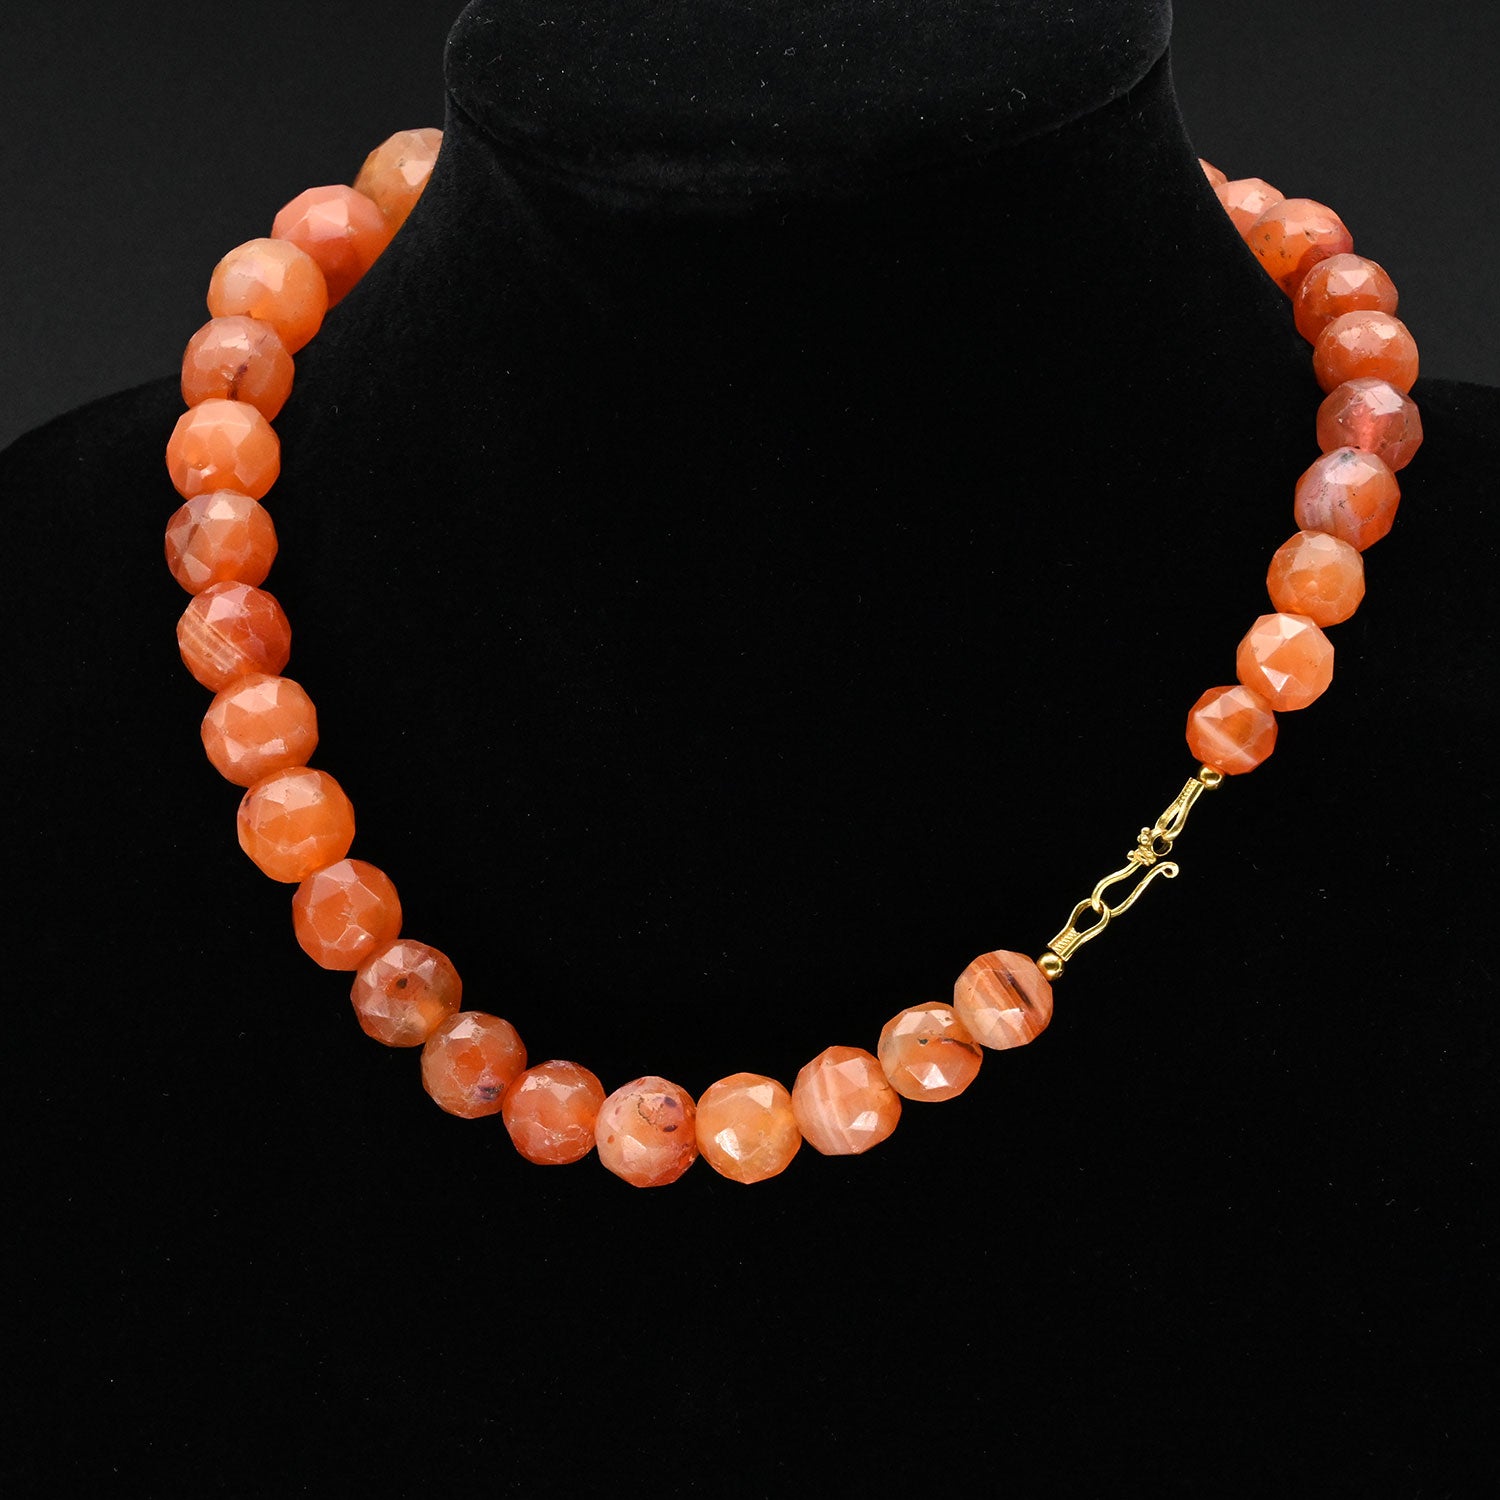 A Roman Carnelian Faceted Bead Necklace, Roman Imperial Period, ca. 1st - 2nd century CE